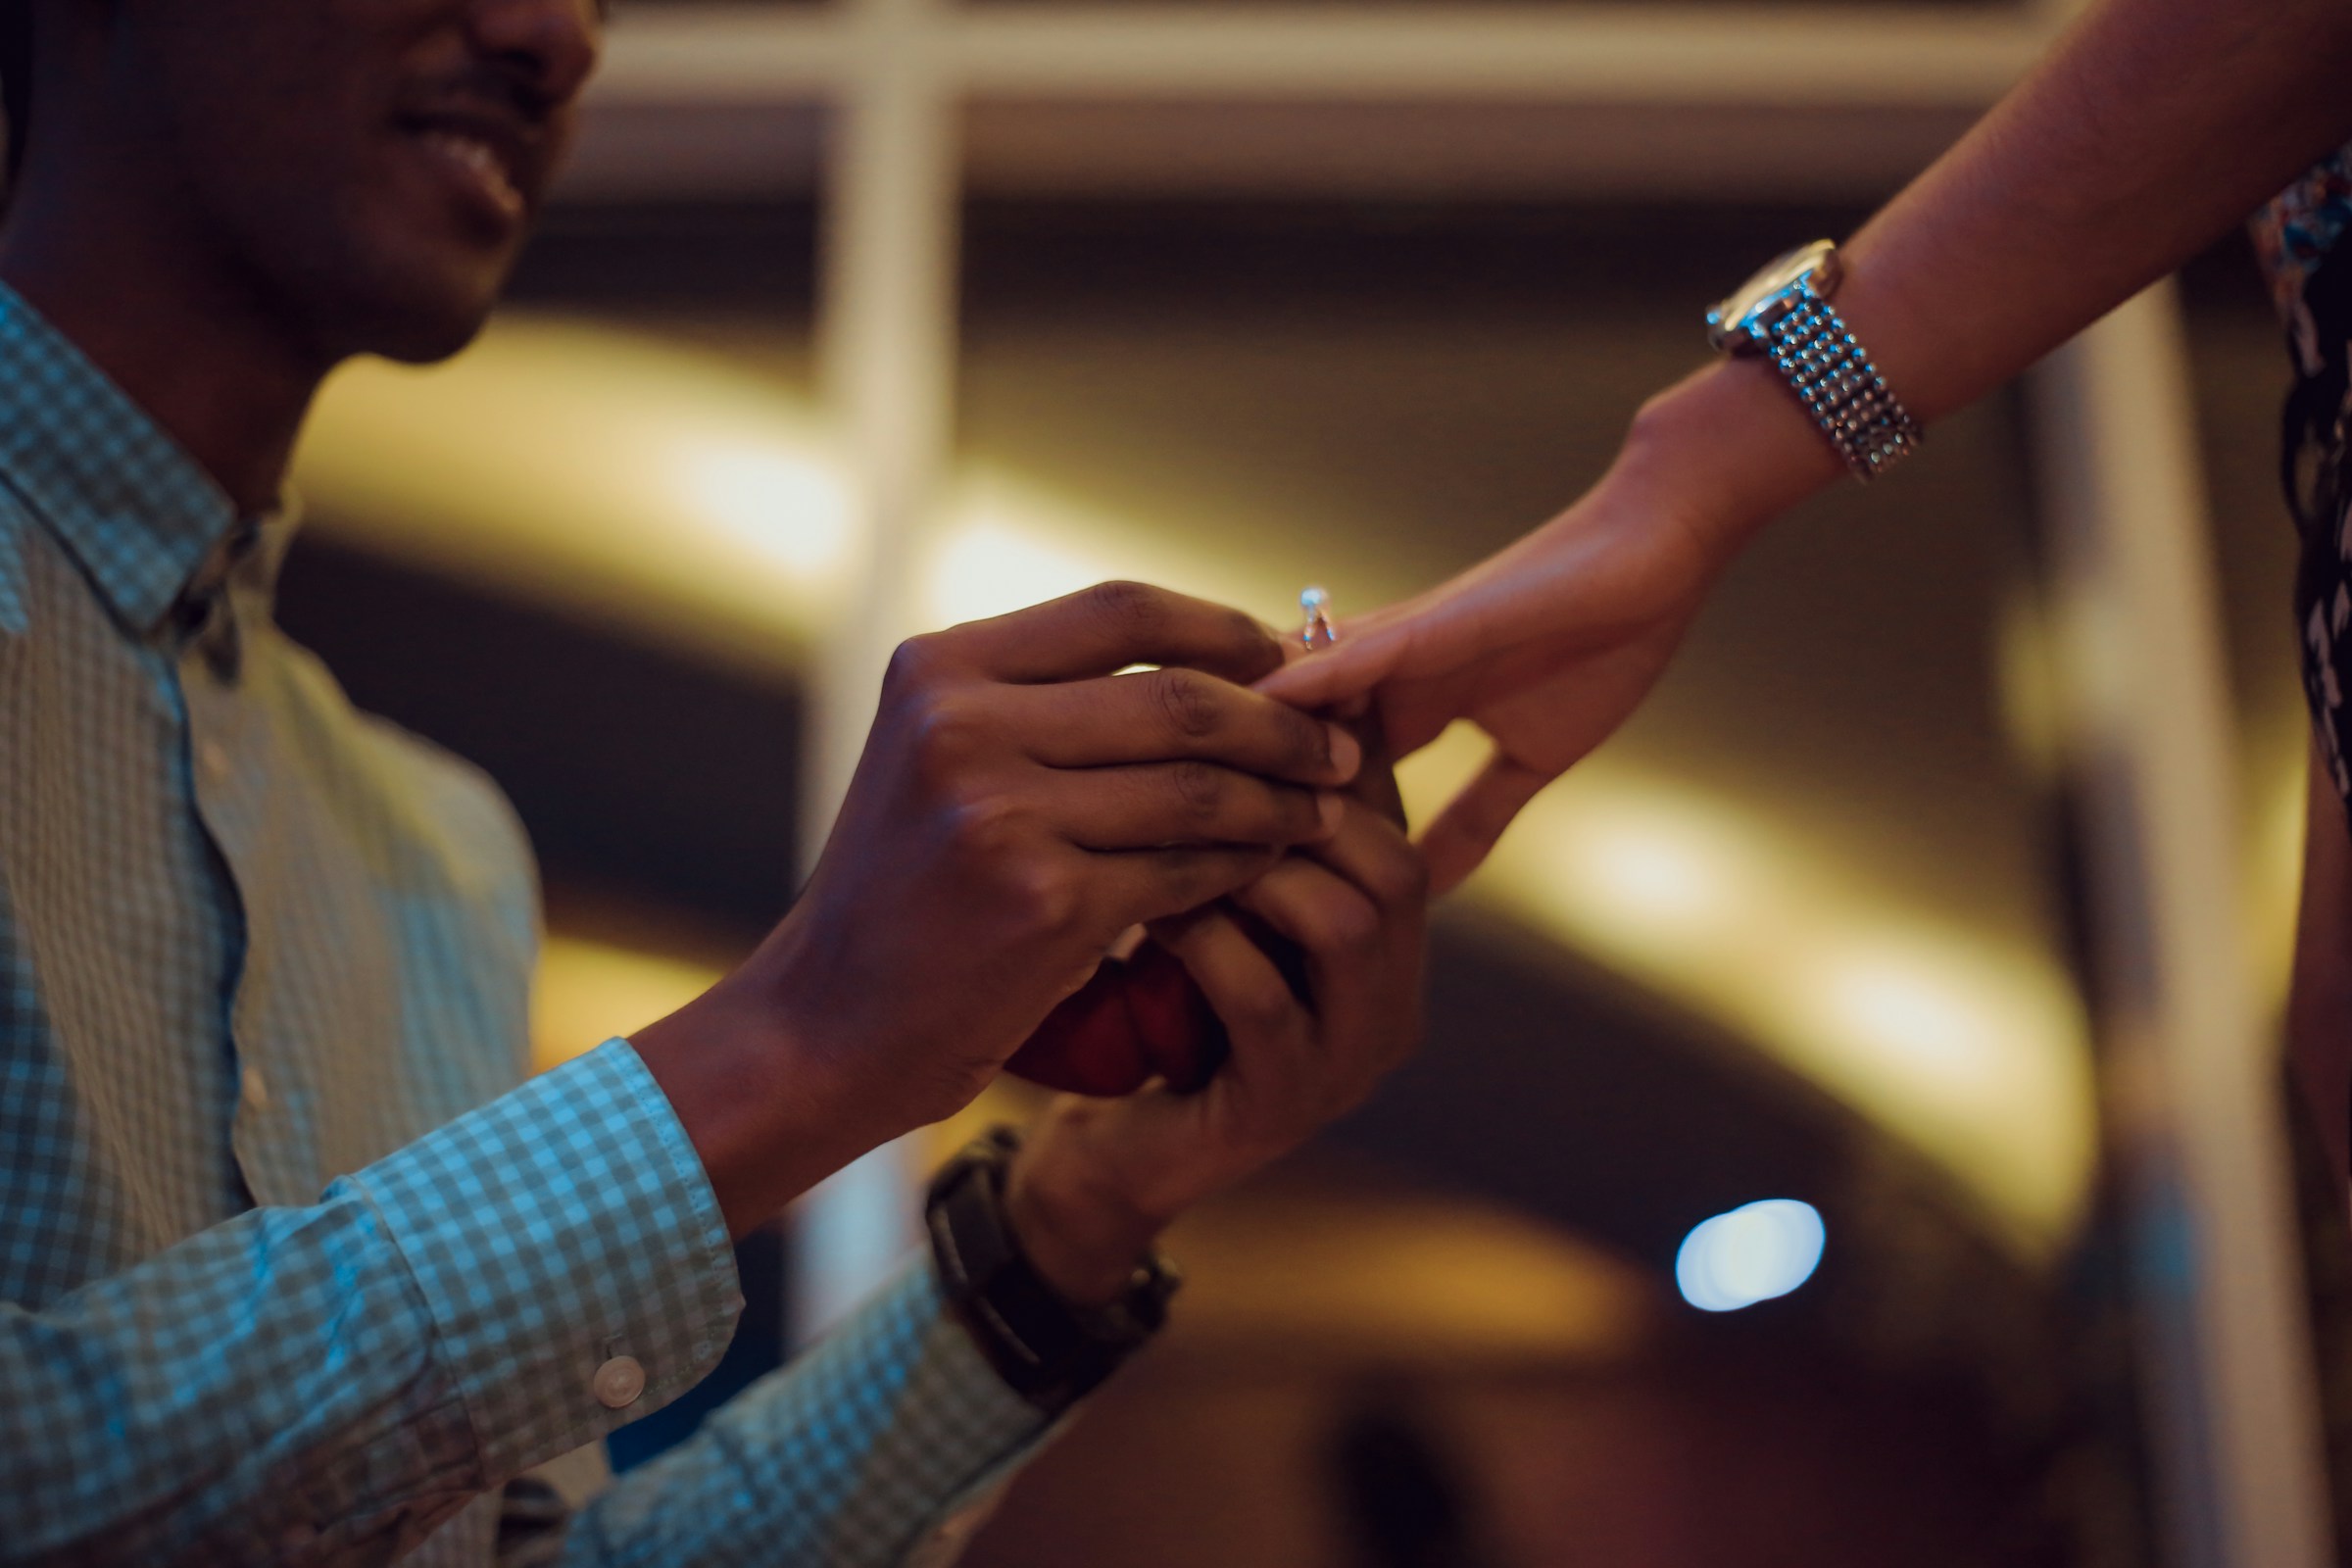 Man putting a ring on a woman's finger. | Source: Unsplash